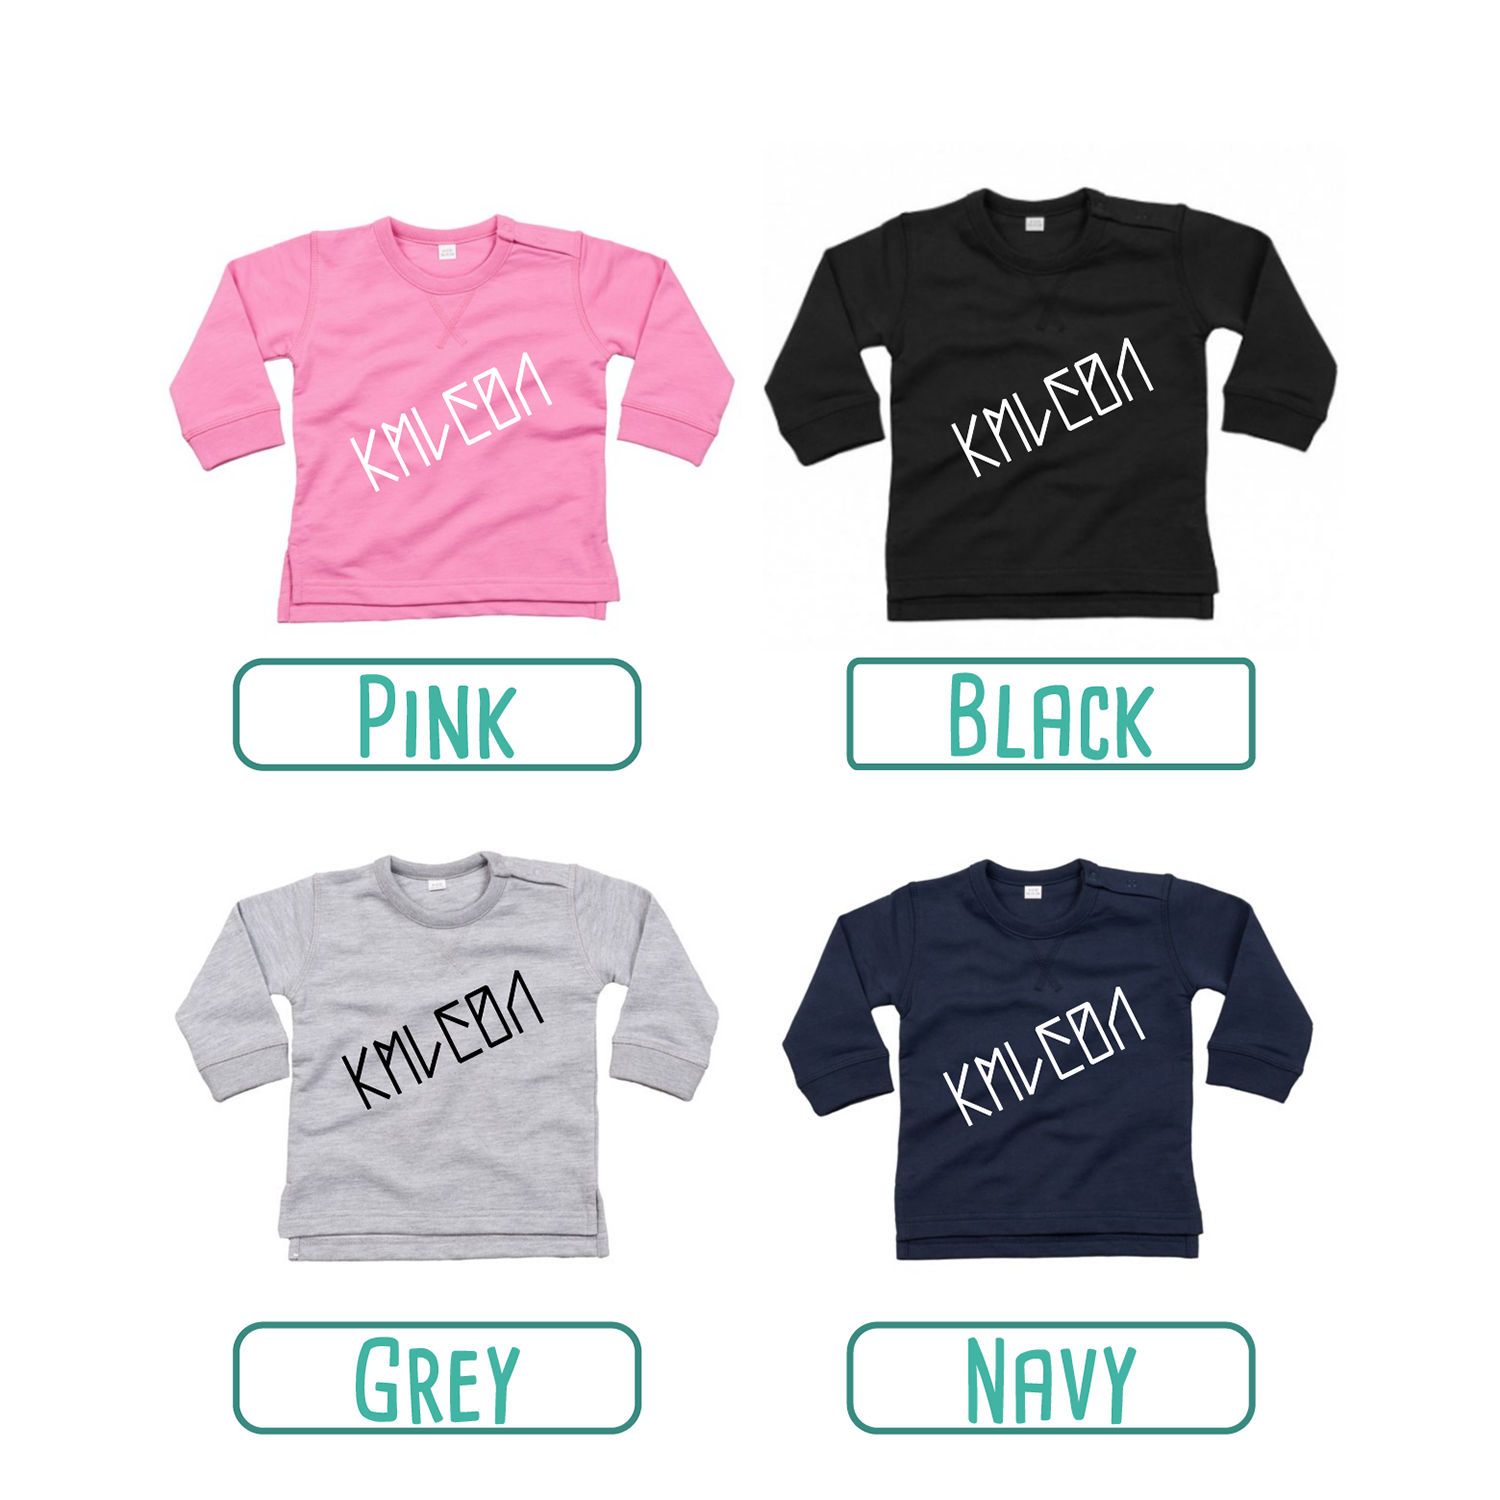 Colour options for baby or toddler sweaters by KMLeon.